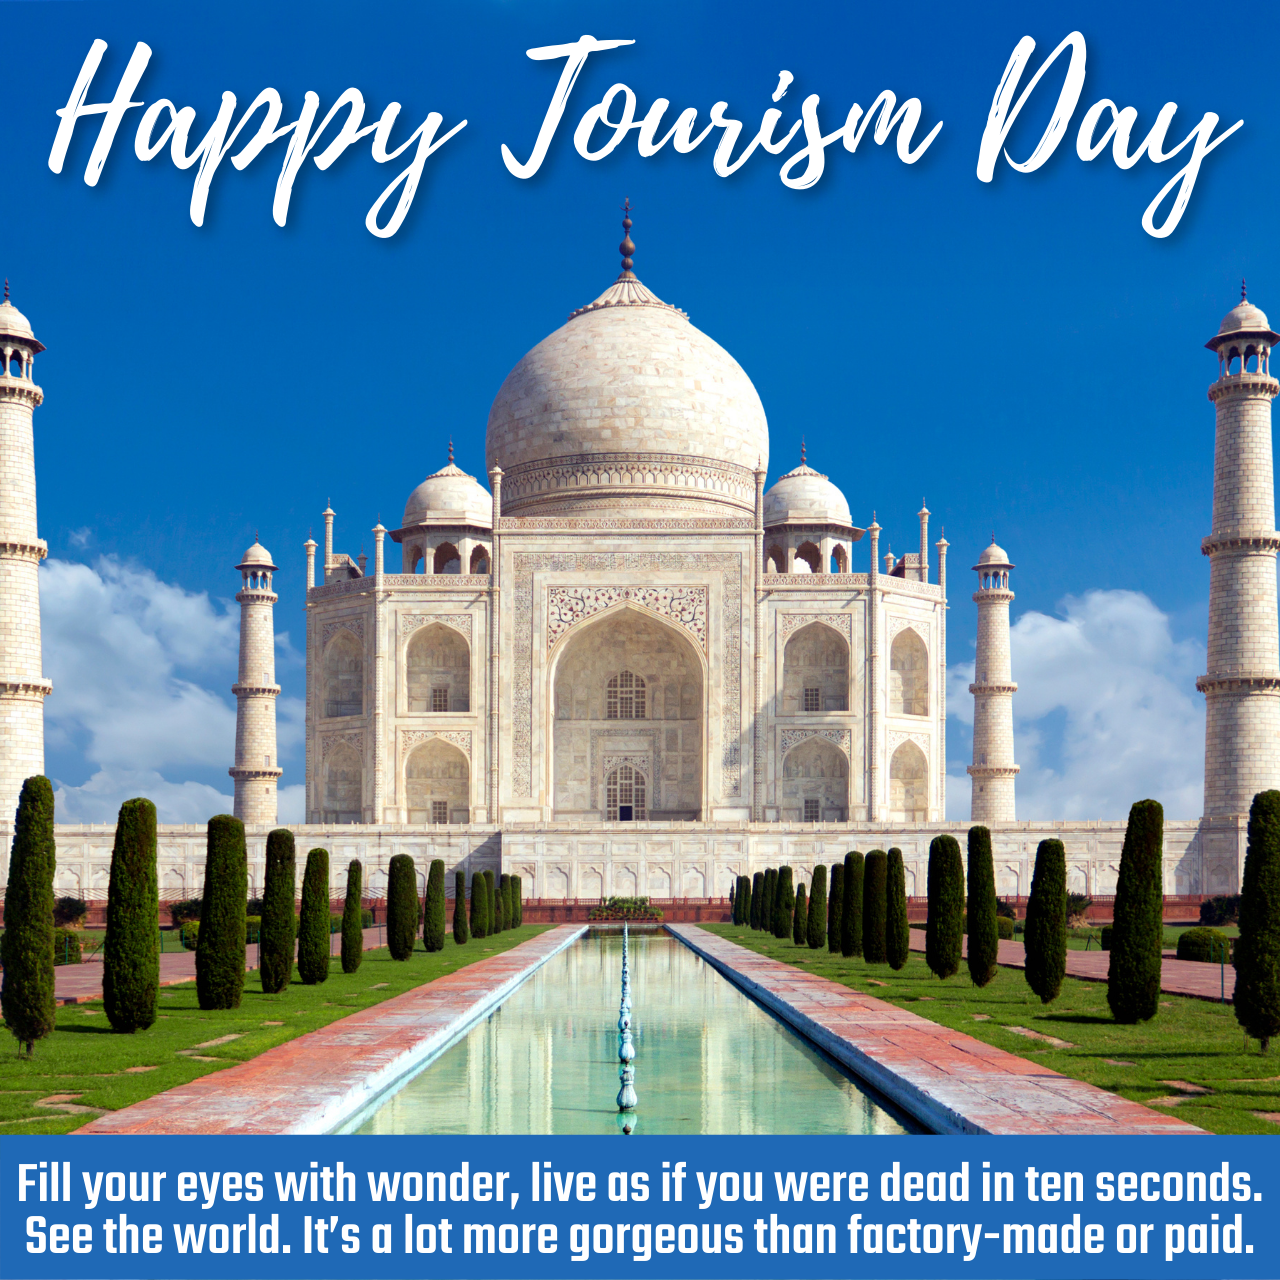 World Tourism Day 2021 Theme, Quotes, Wishes, Greetings, HD Images and Poster to Share